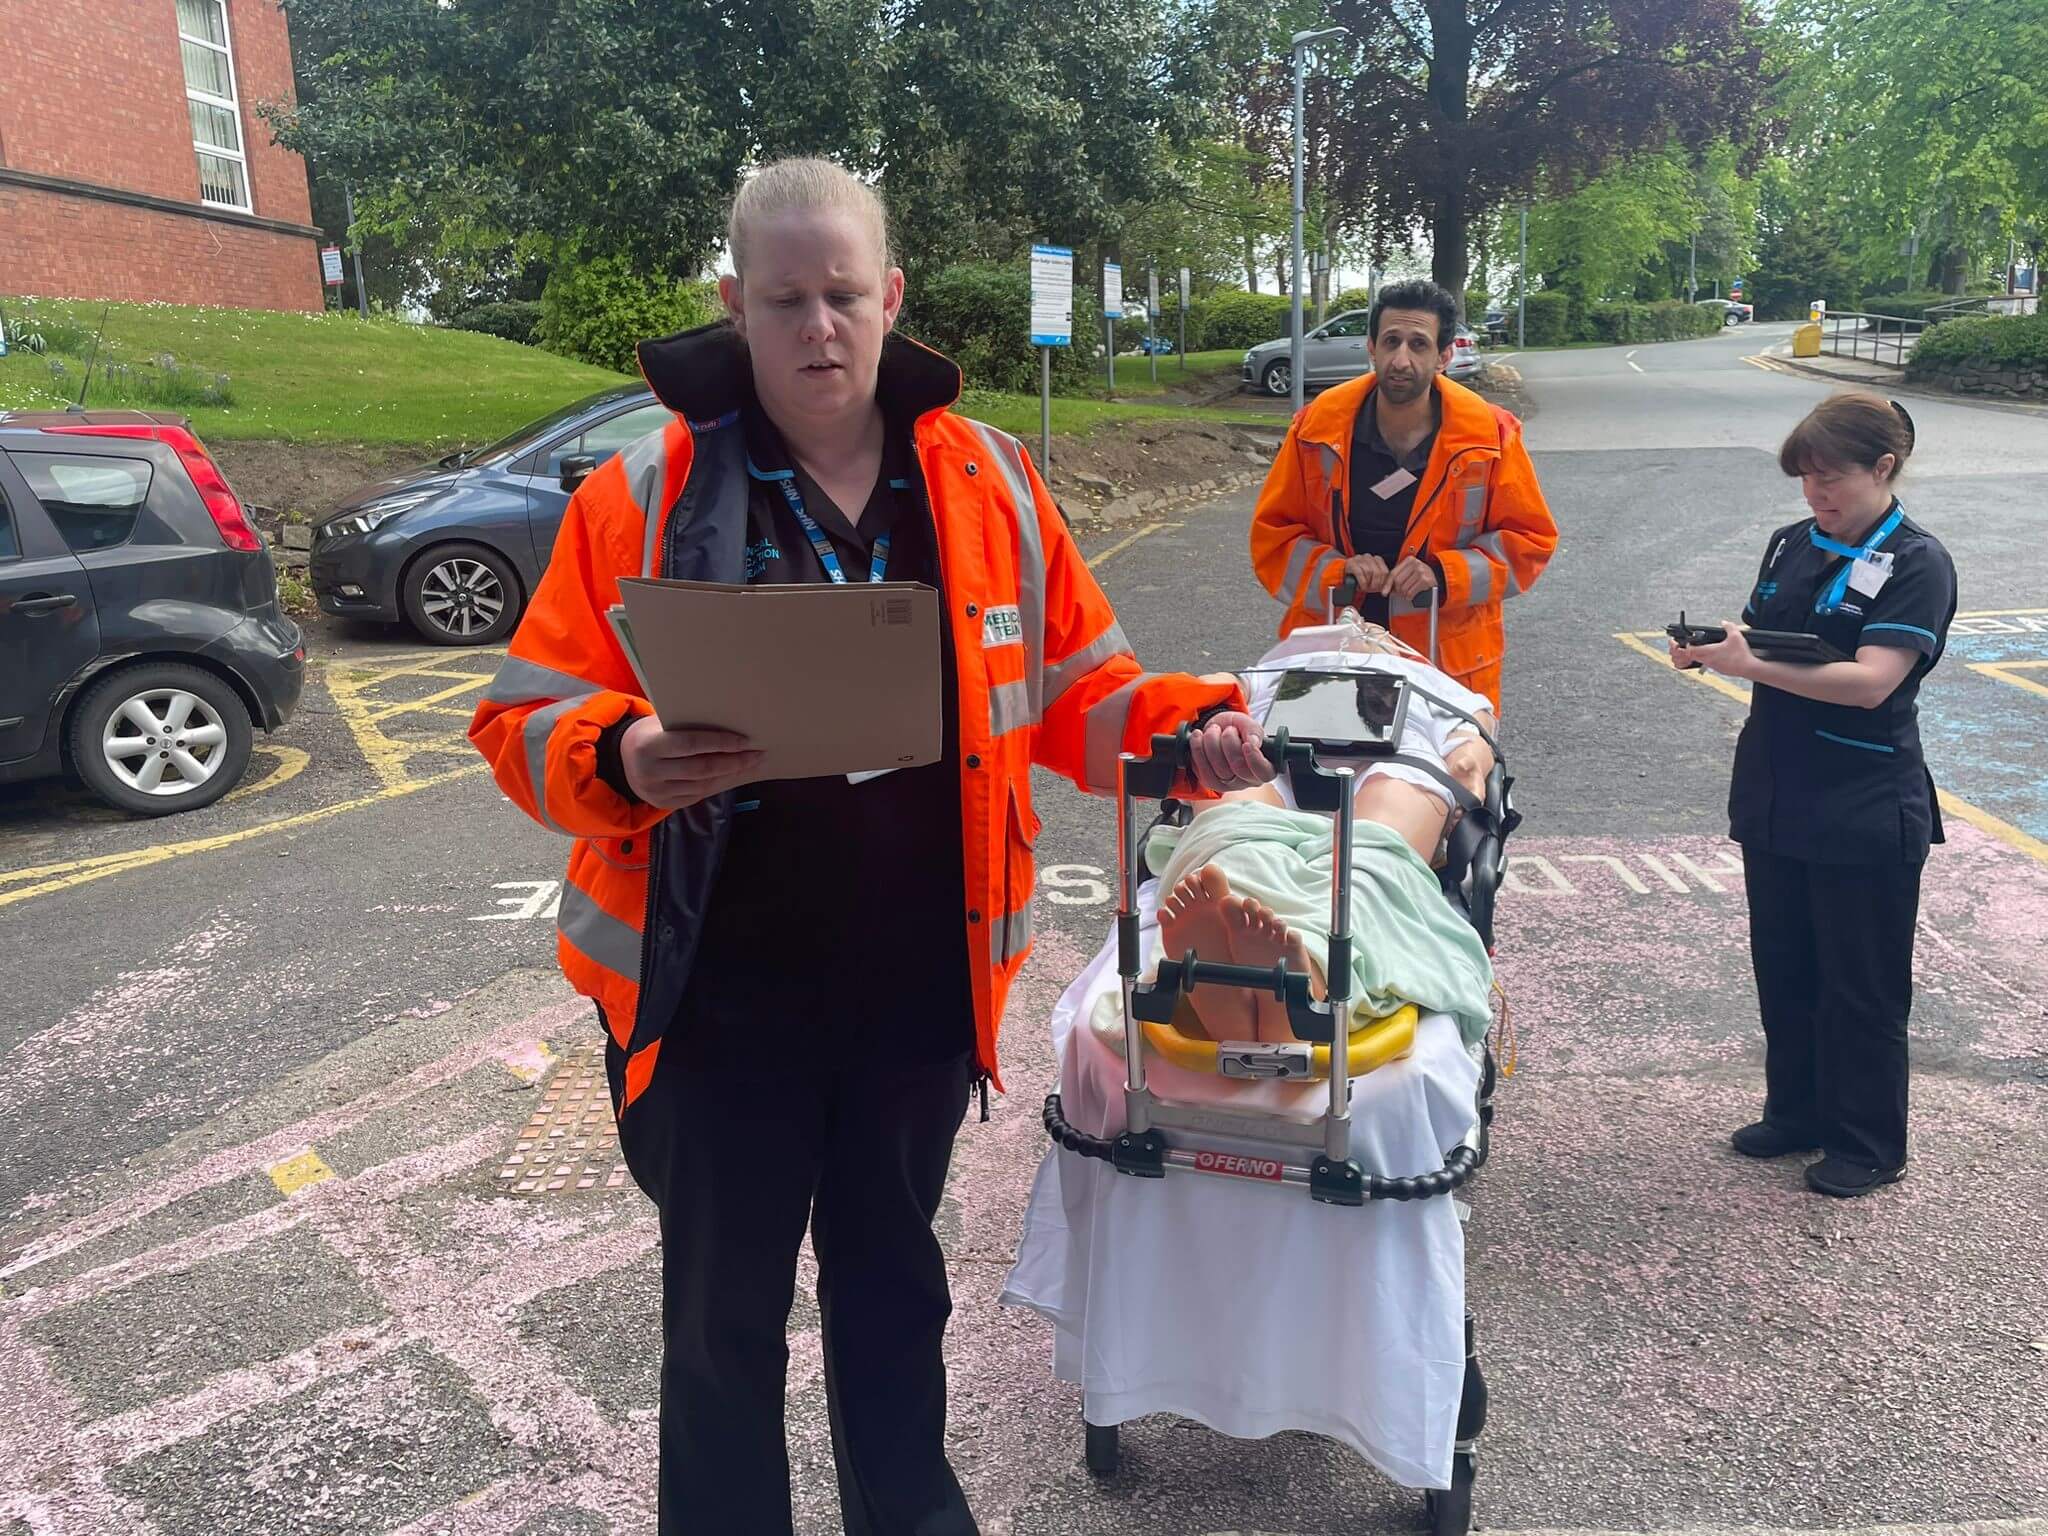 3 NHS staff member preparing to push a mannequin on a mobile patient bed